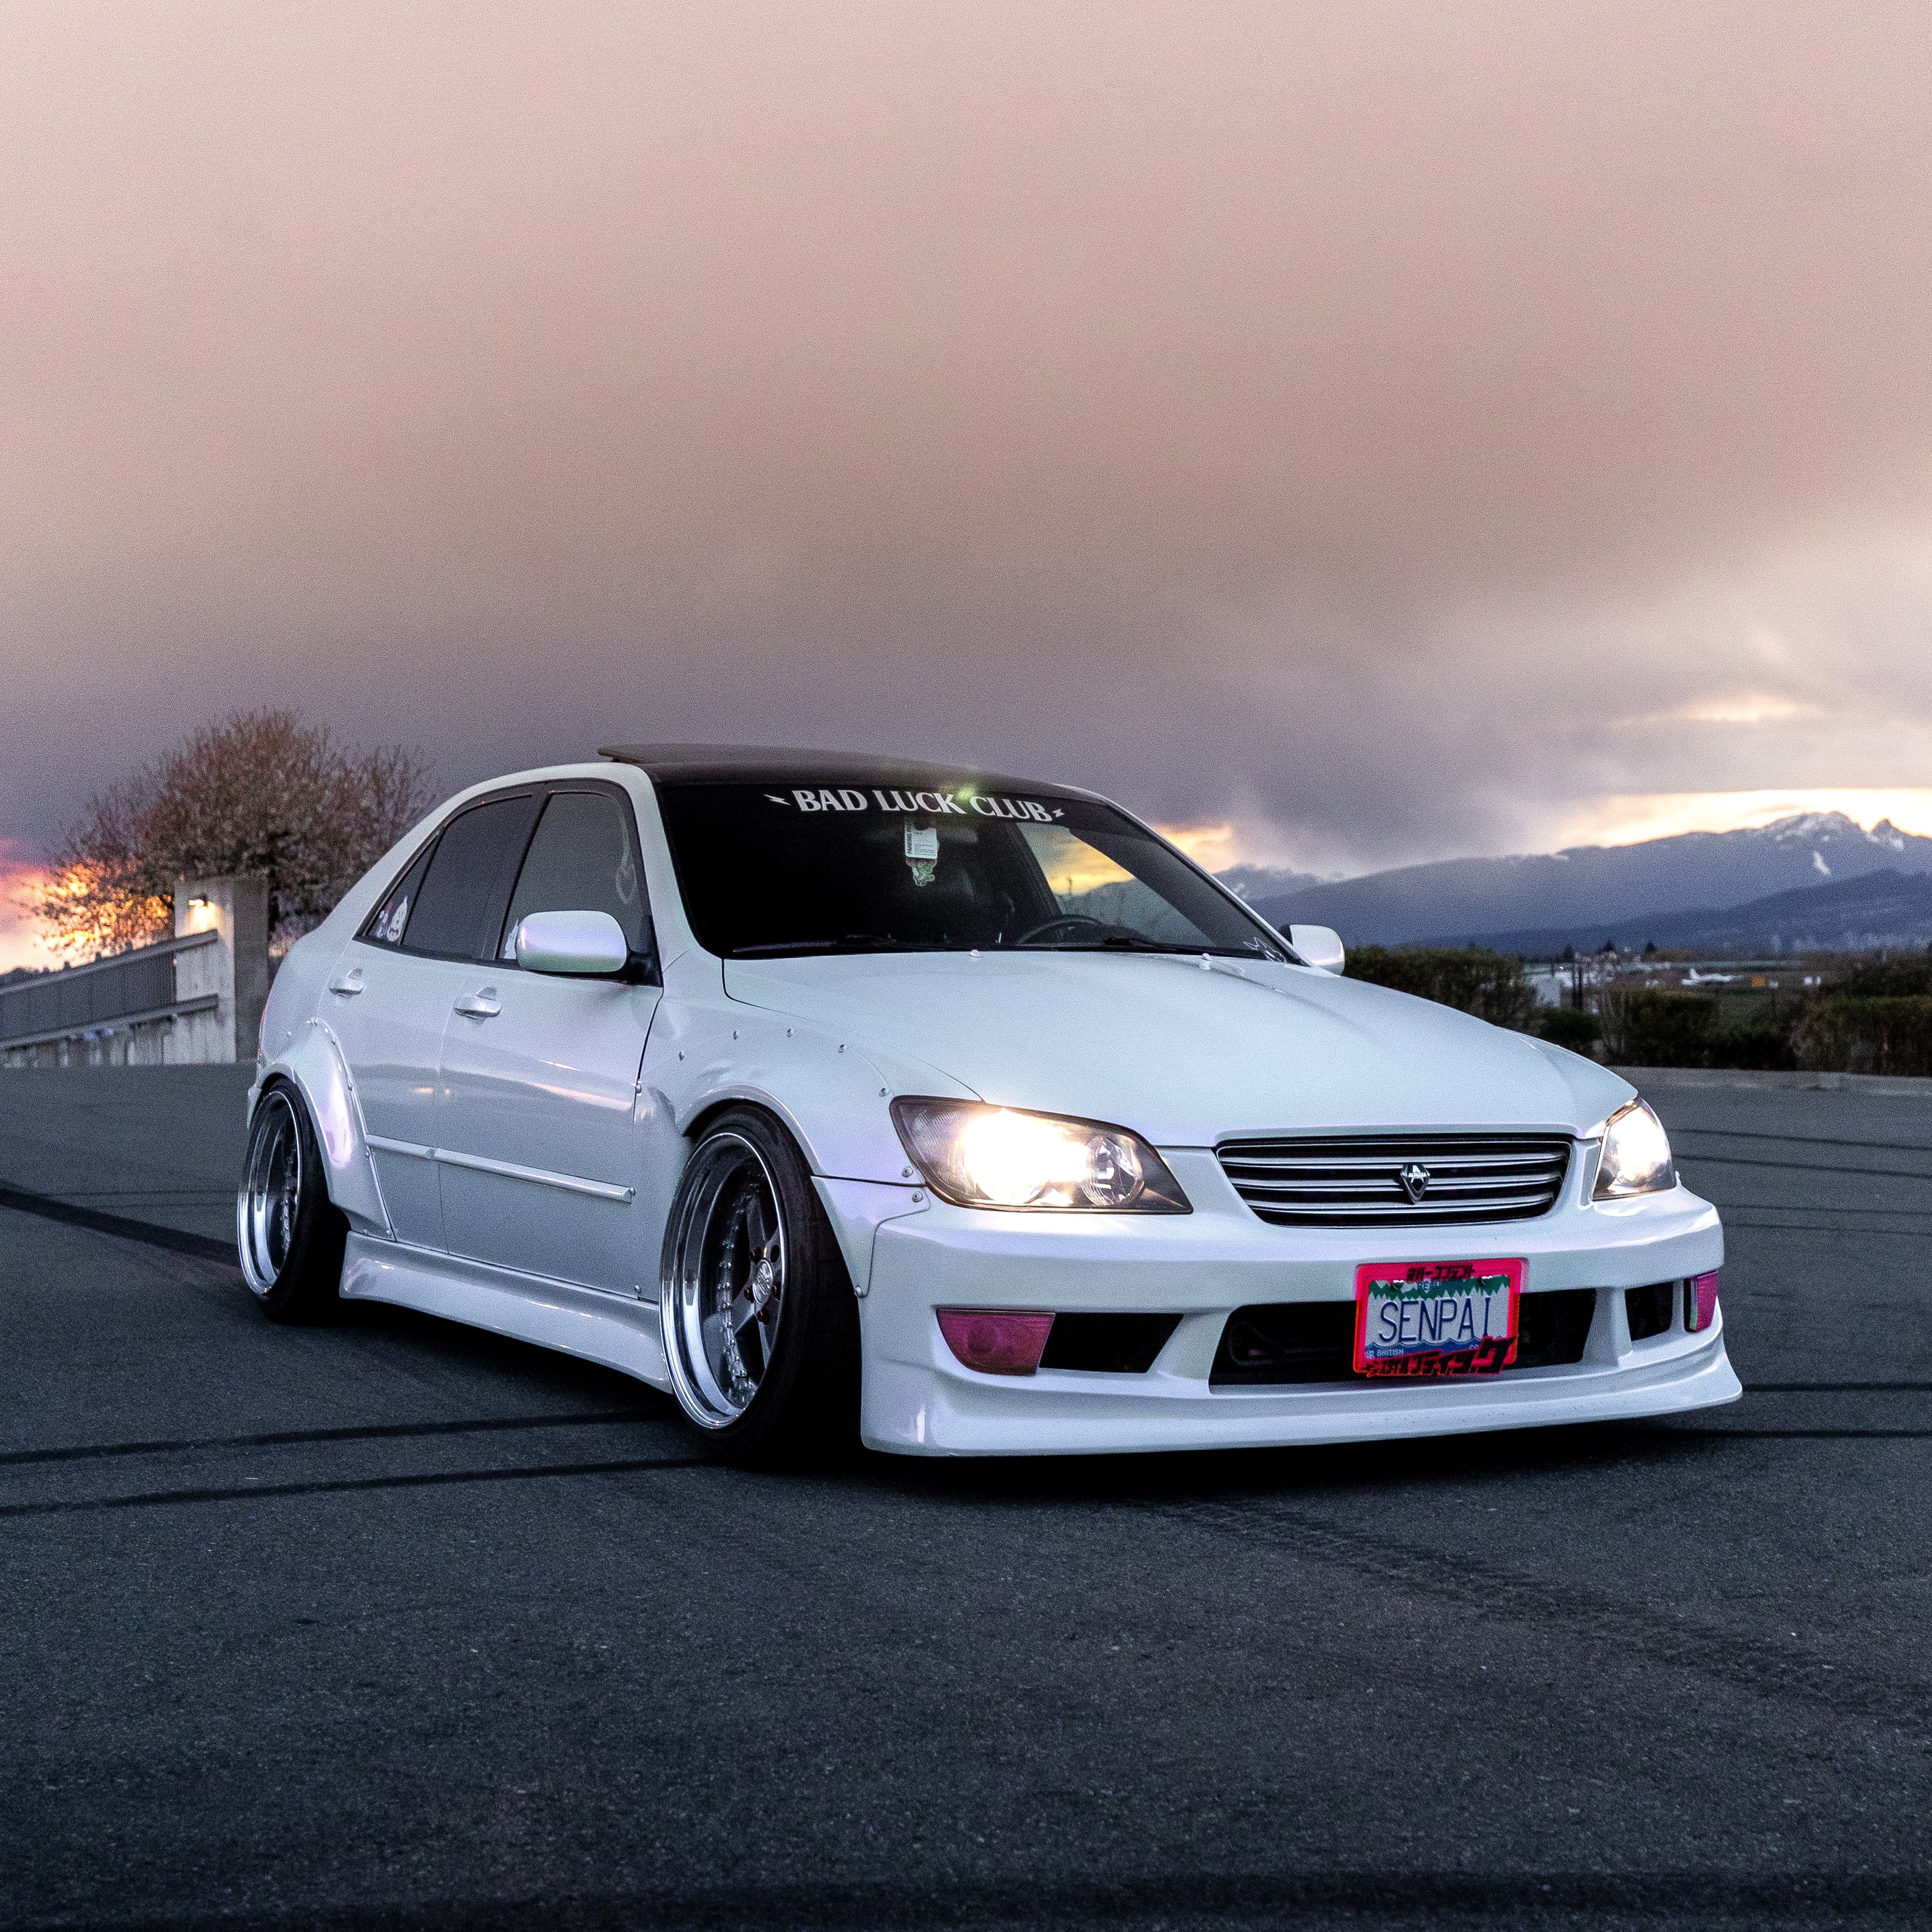 white widebody lexus is300 with vertex bodykit on wide 3 piece wheels. also known as a toyota altezza. car also has a senpai license plate